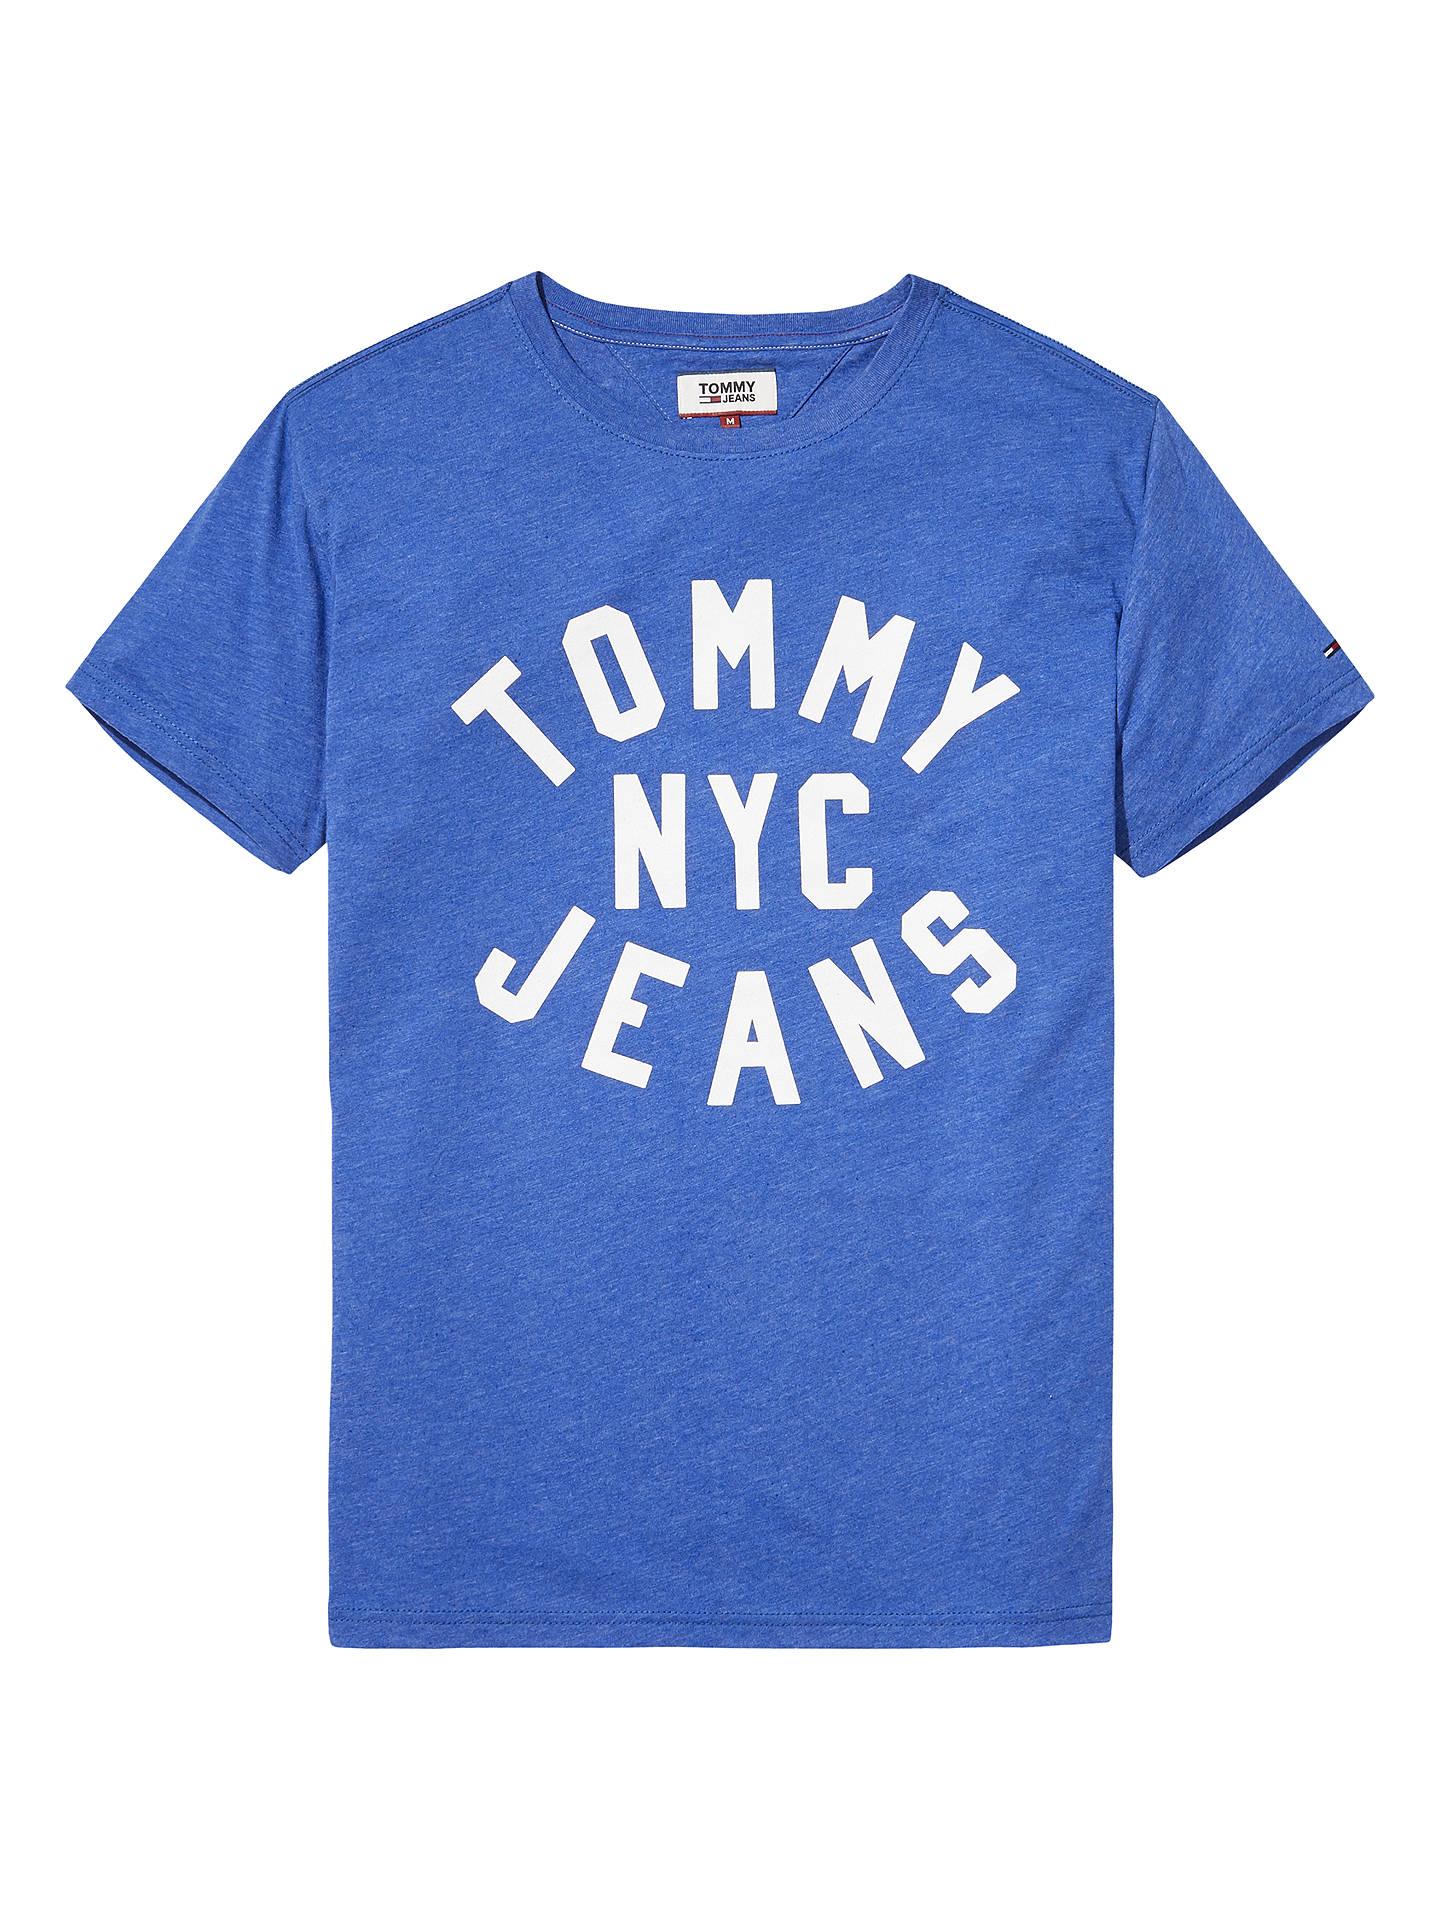 Tommy Jeans Logo - Tommy Jeans Logo Print T-Shirt at John Lewis & Partners